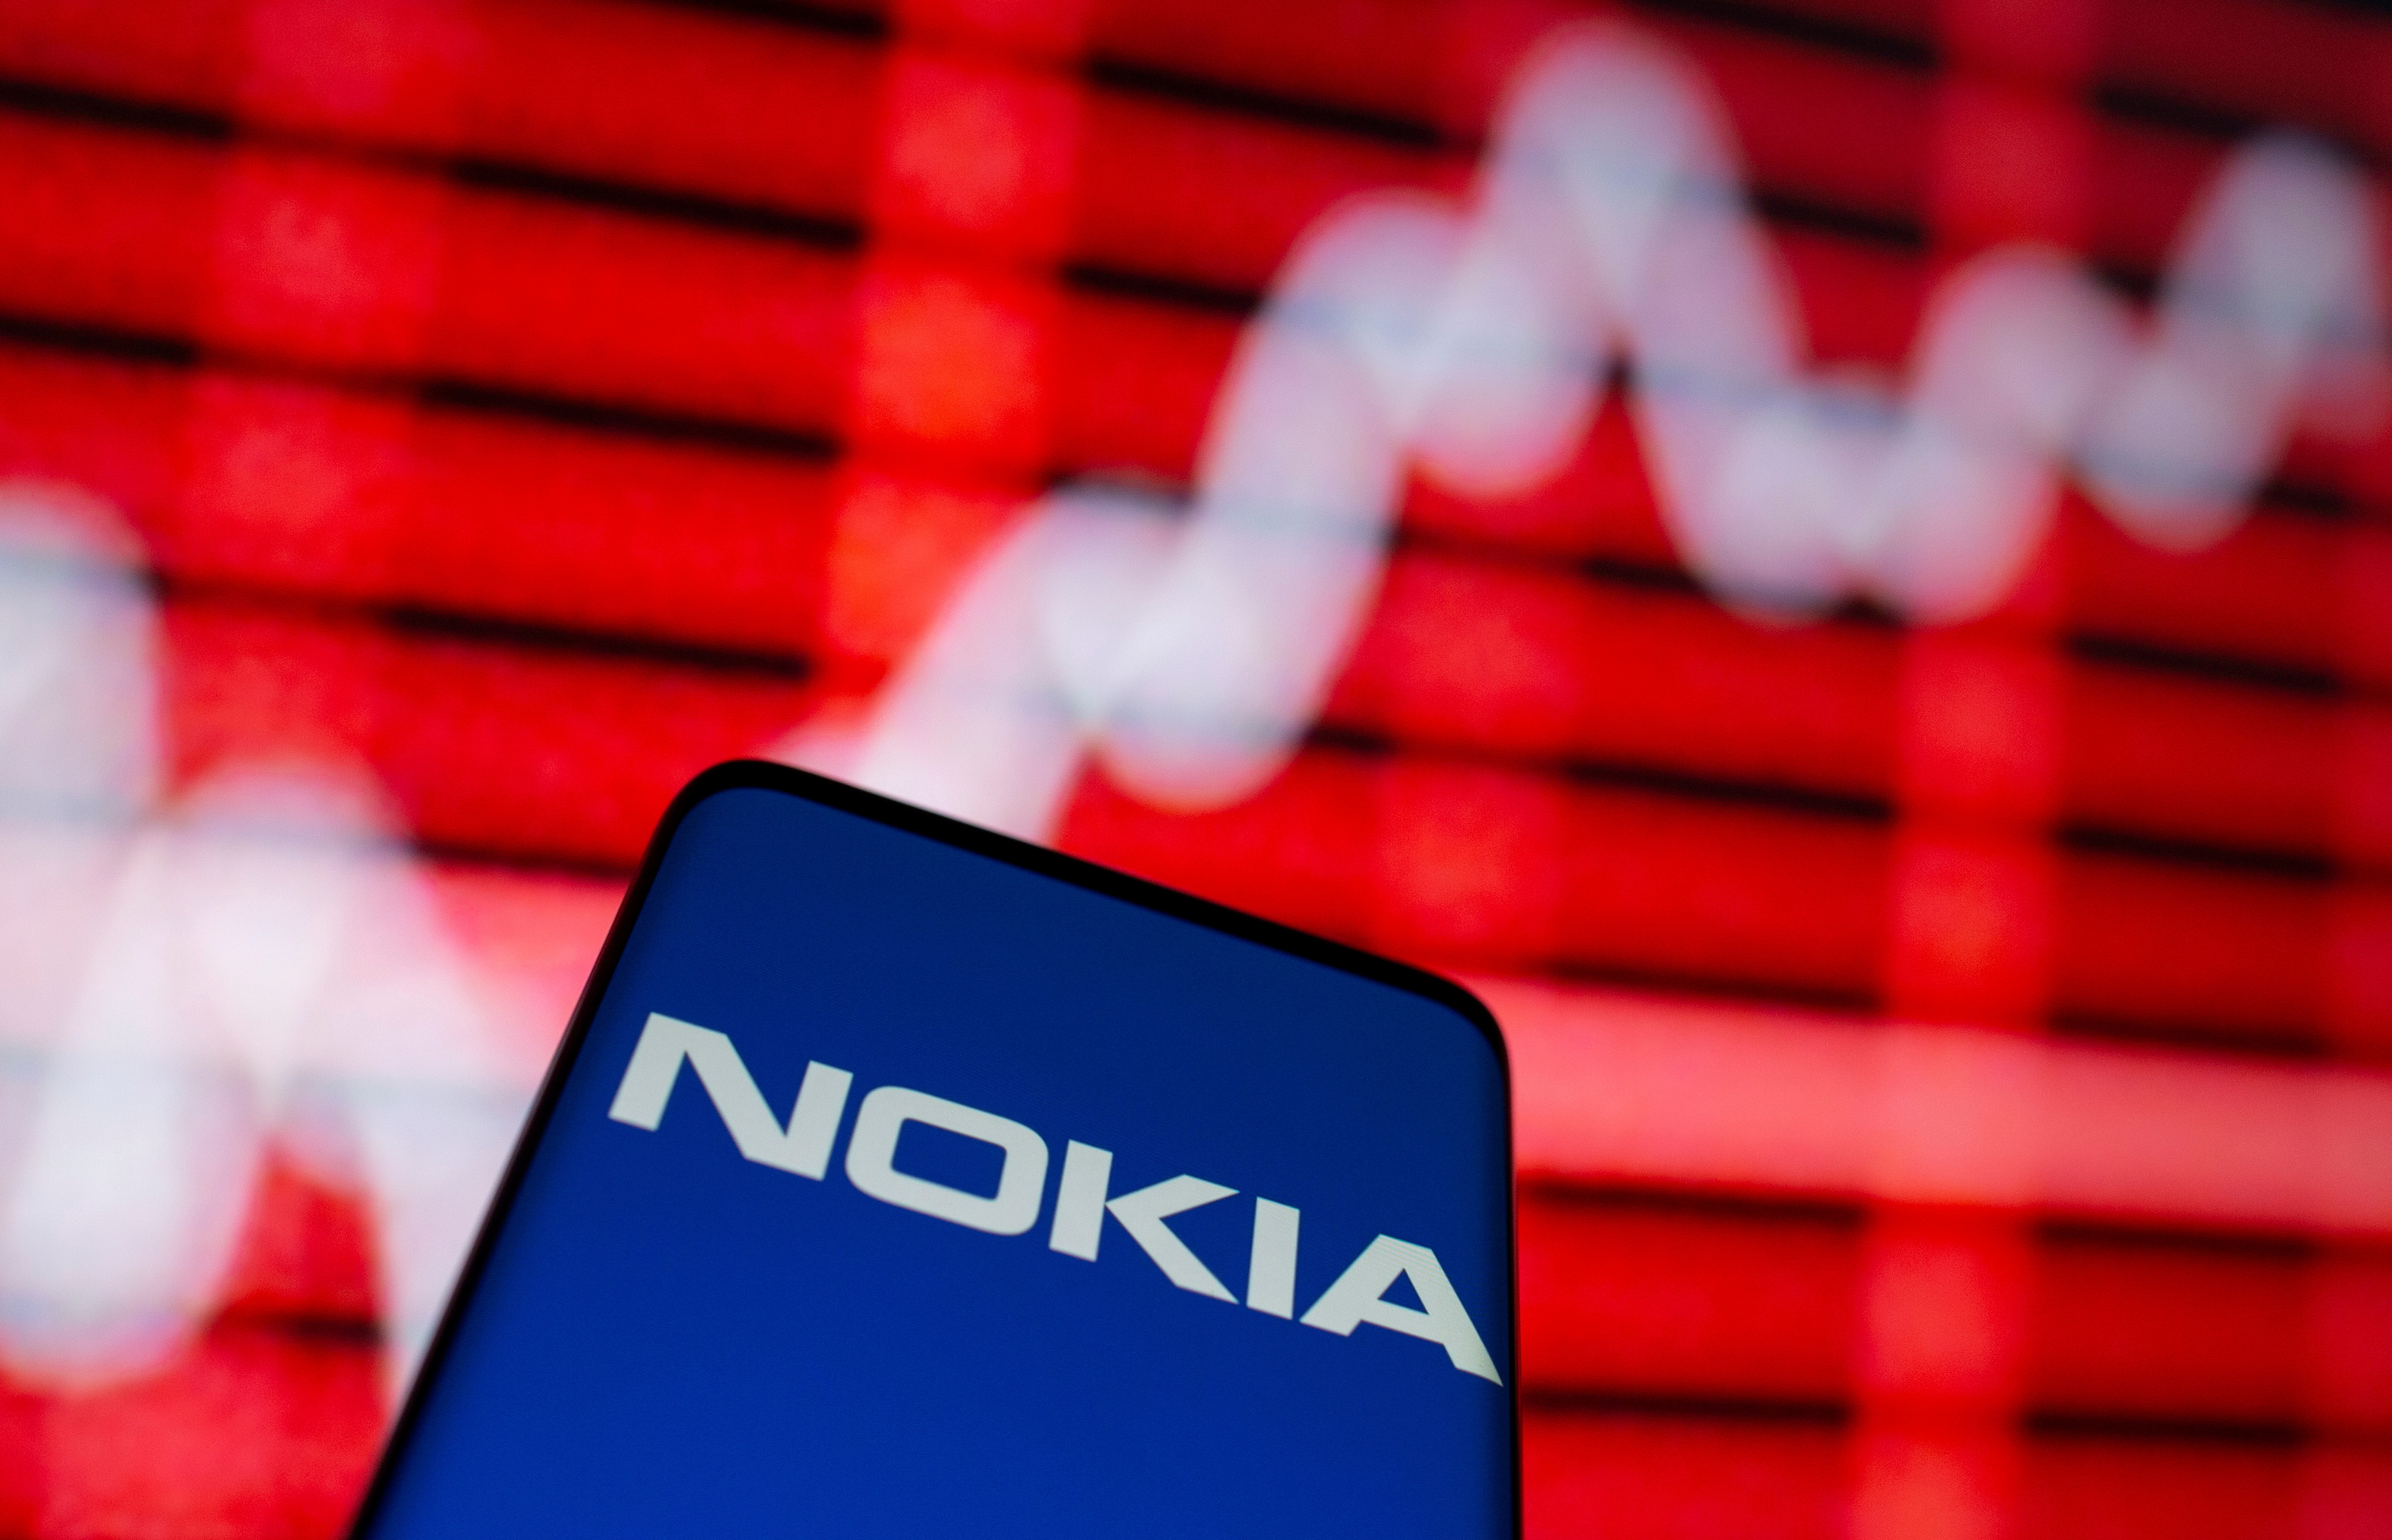 The Nokia logo is seen on a smartphone in front of a displayed stock graph in this illustration